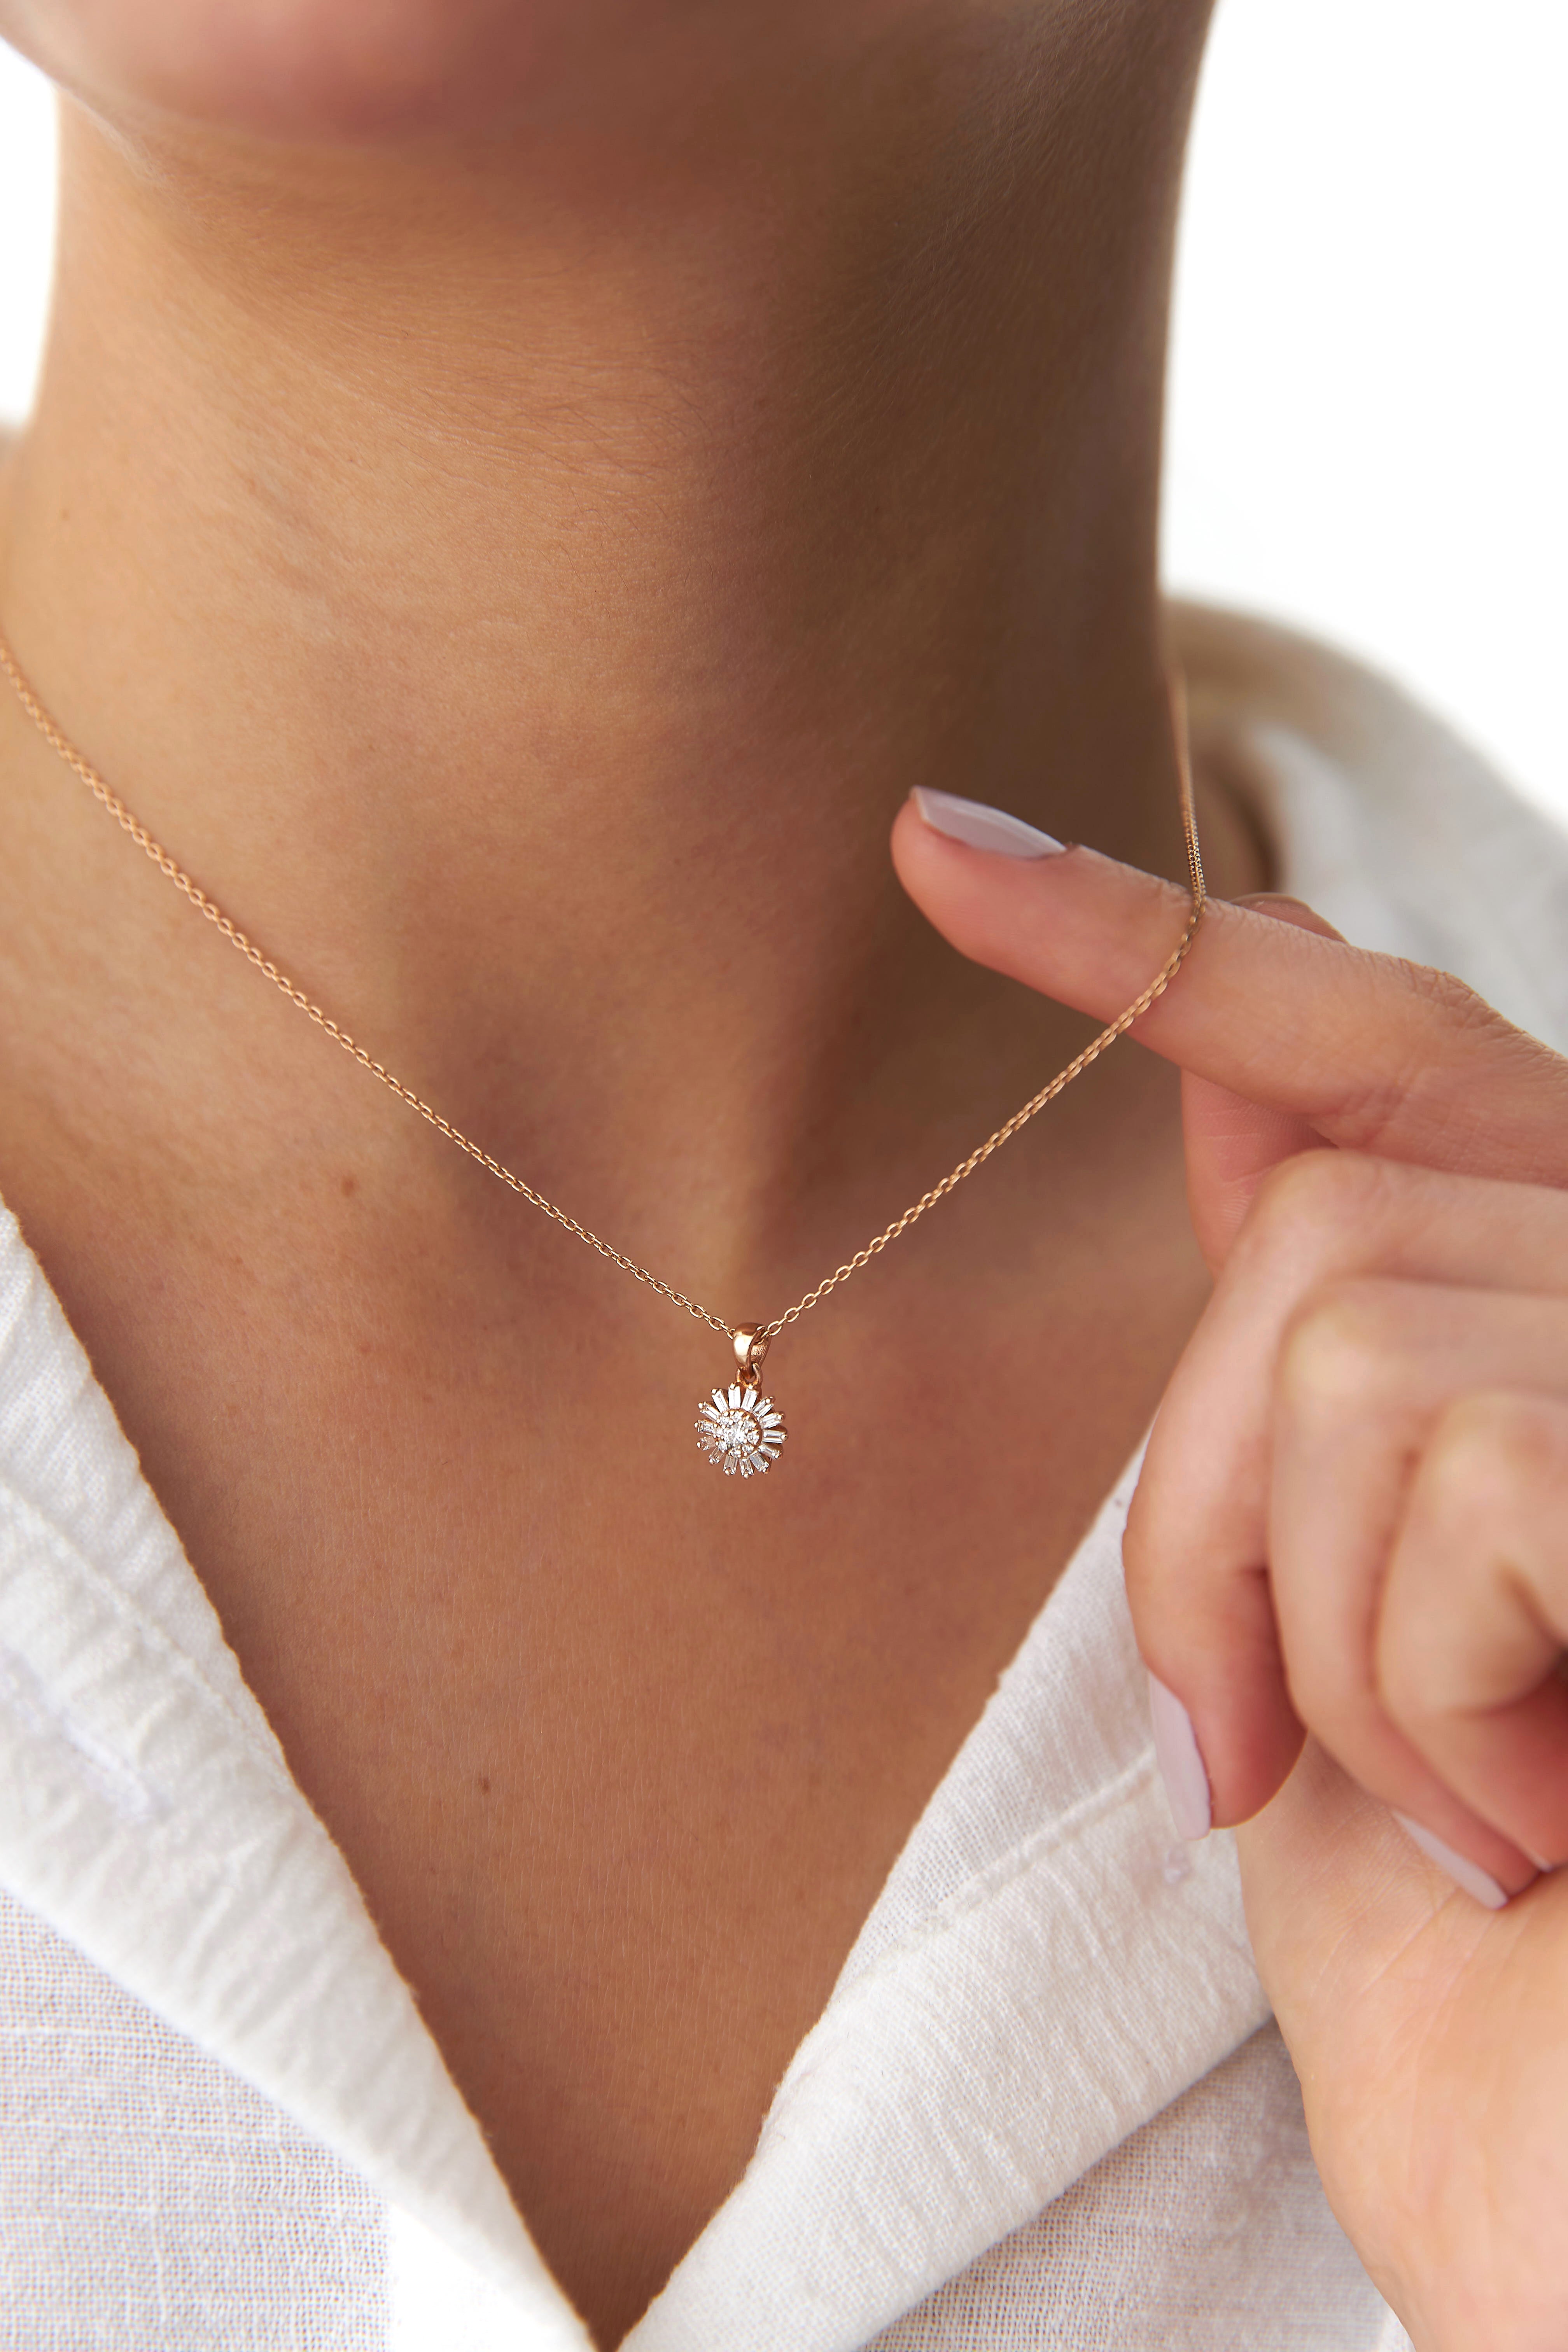 Diamond Flower Necklace Available in 14K and 18K Gold